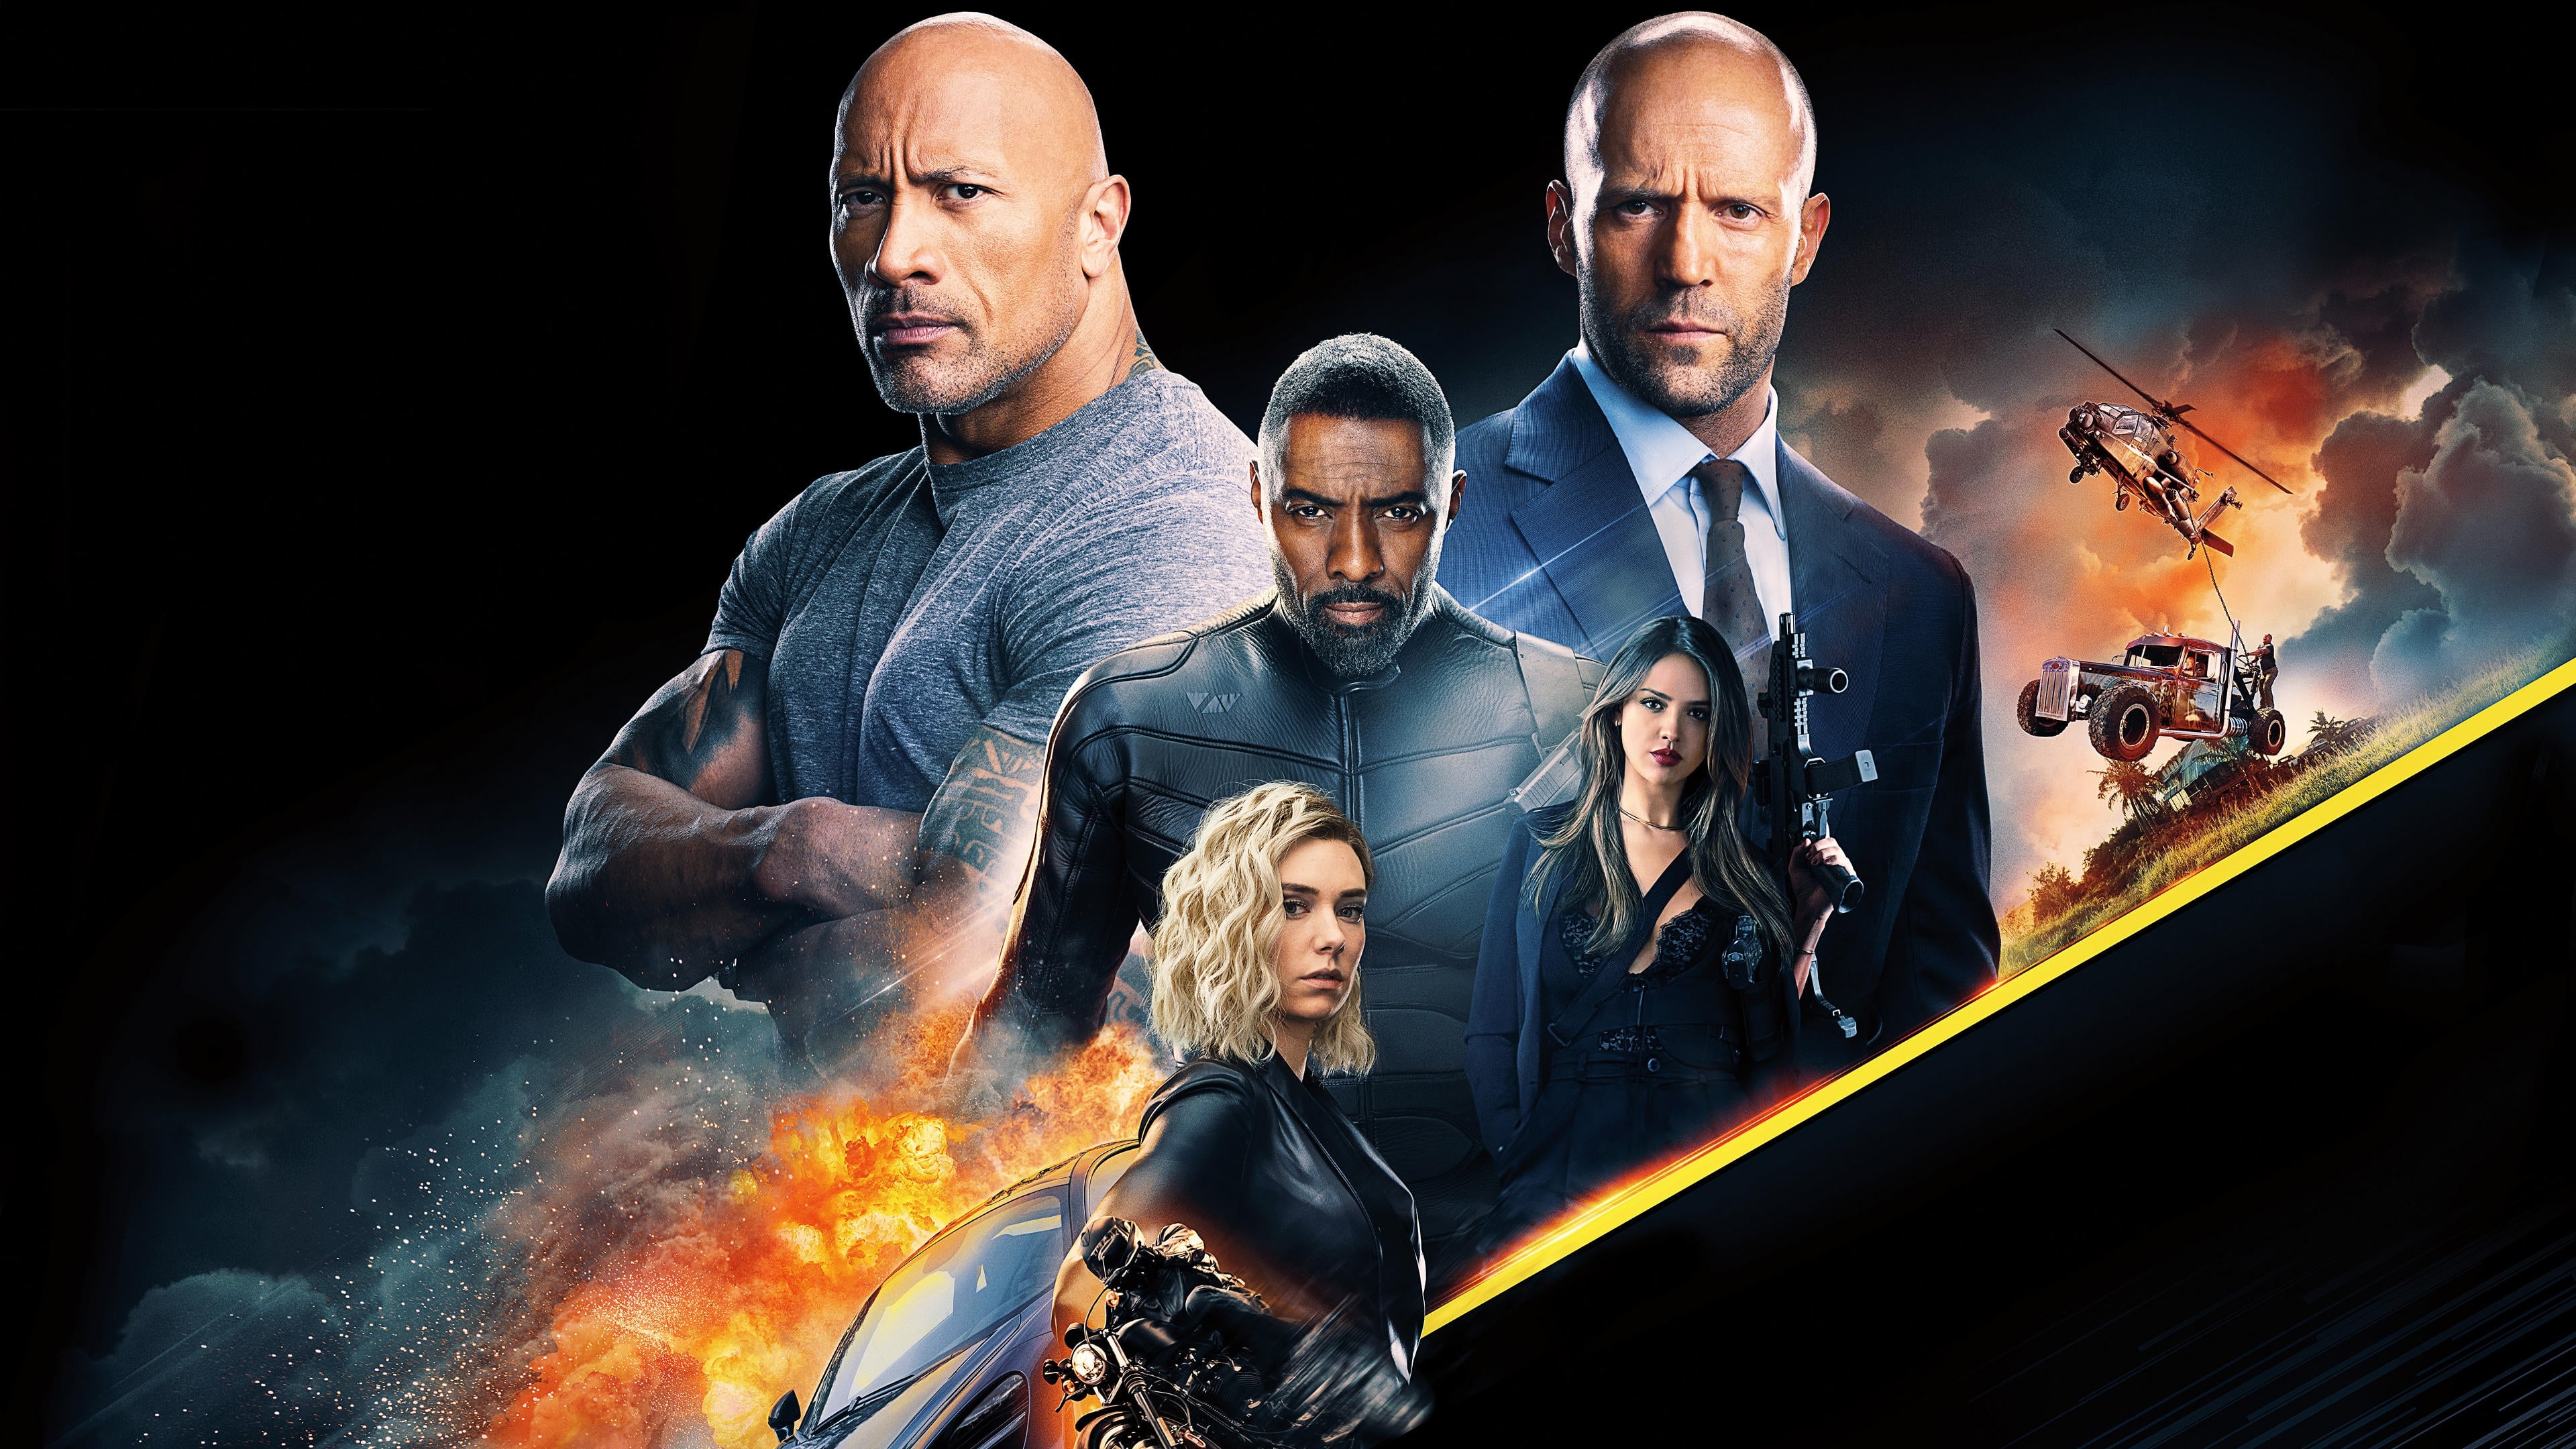 Fast & Furious Presents: Hobbs & Shaw Cast And Crew